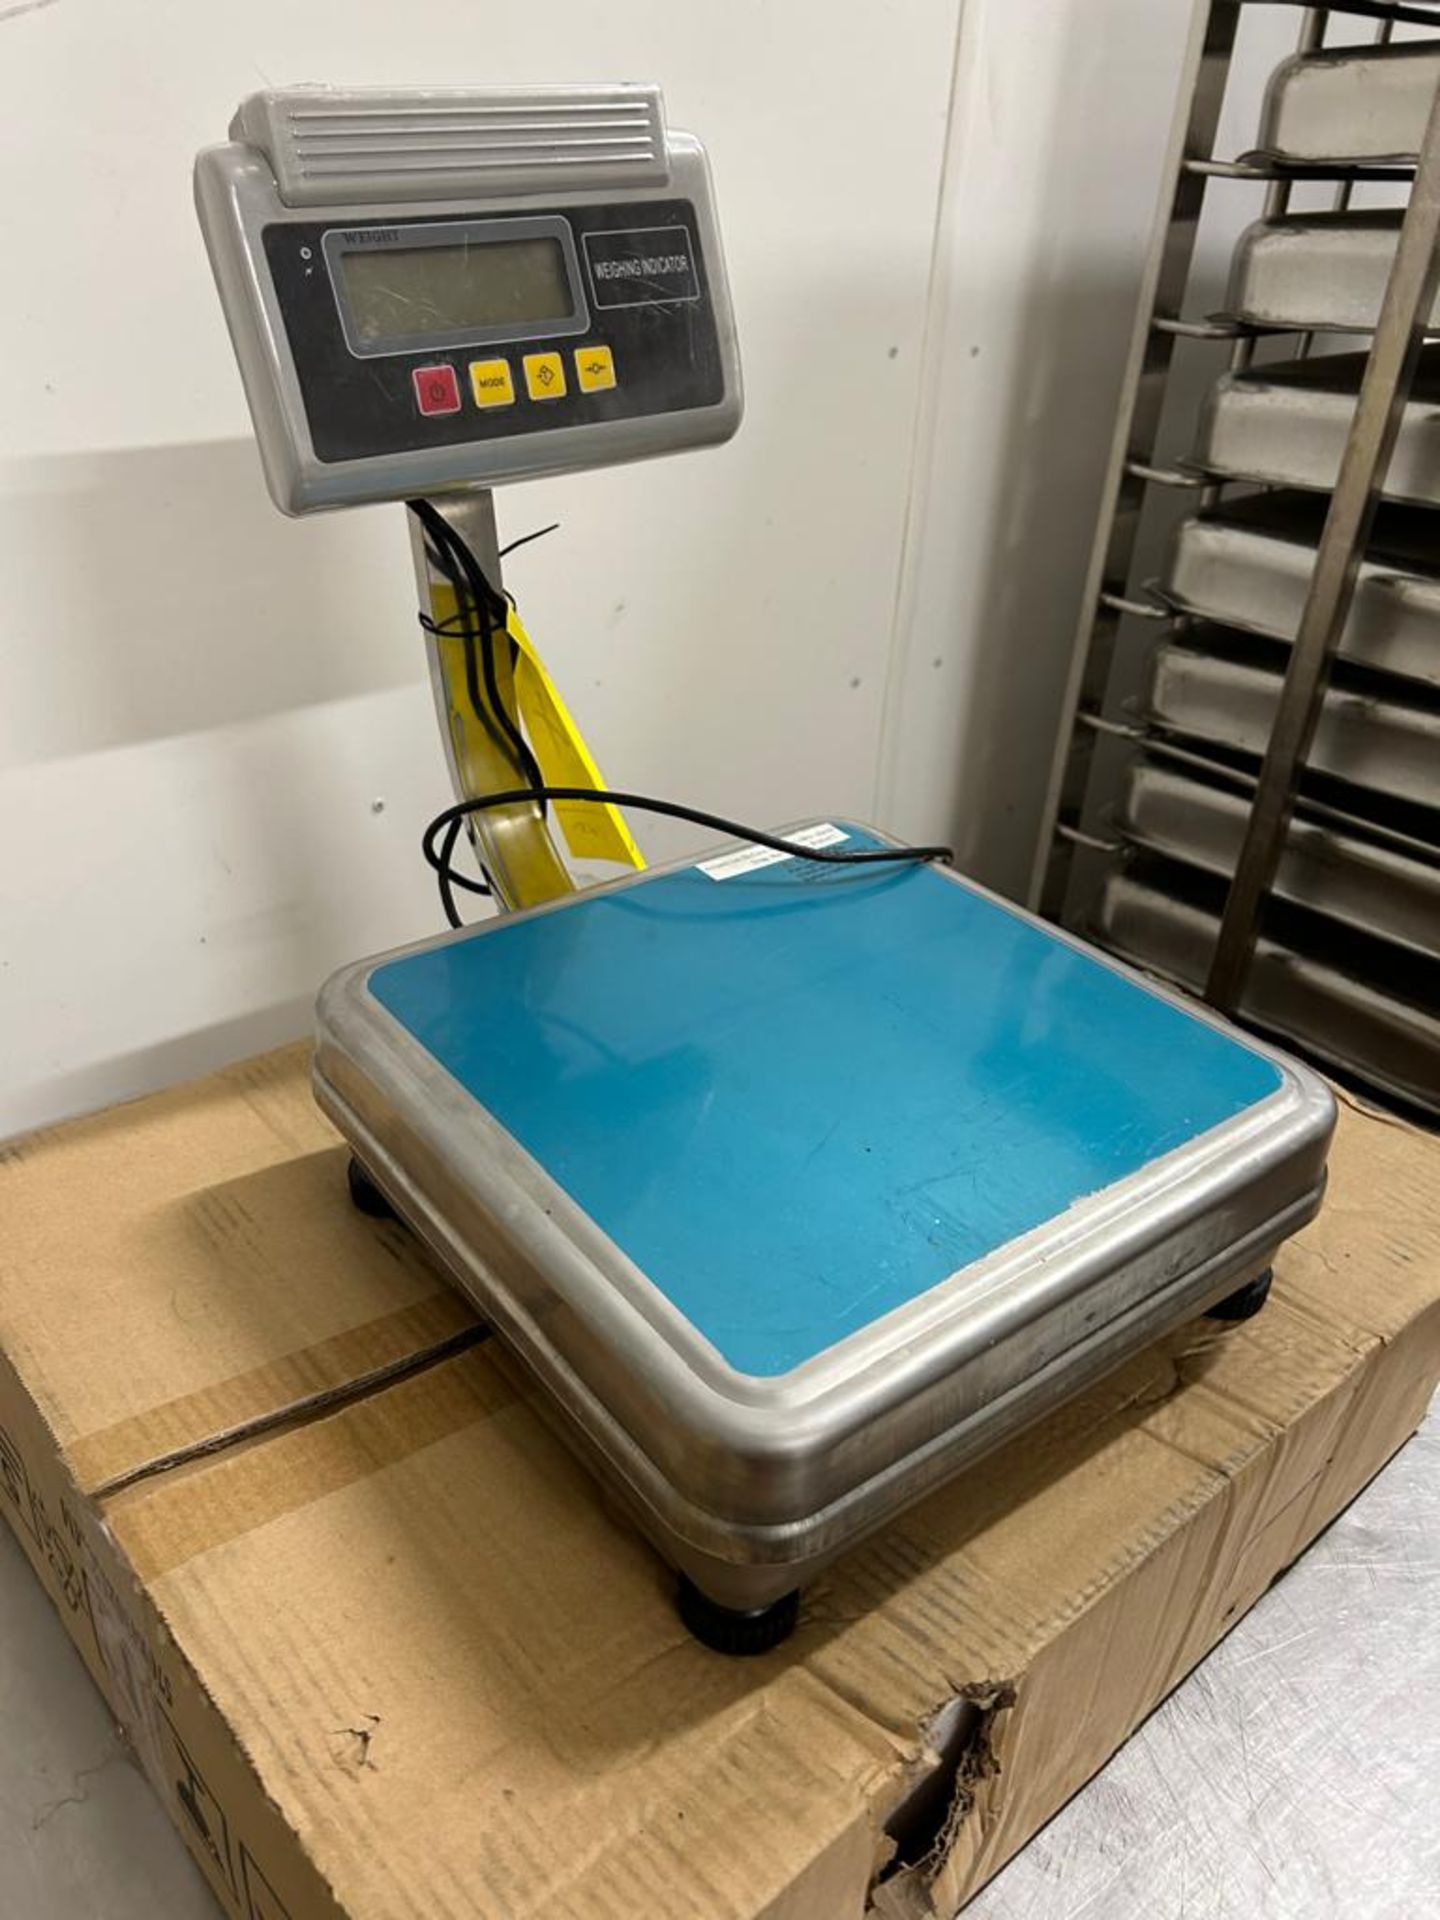 TABLE TOP WEIGHING SCALE - Image 2 of 3